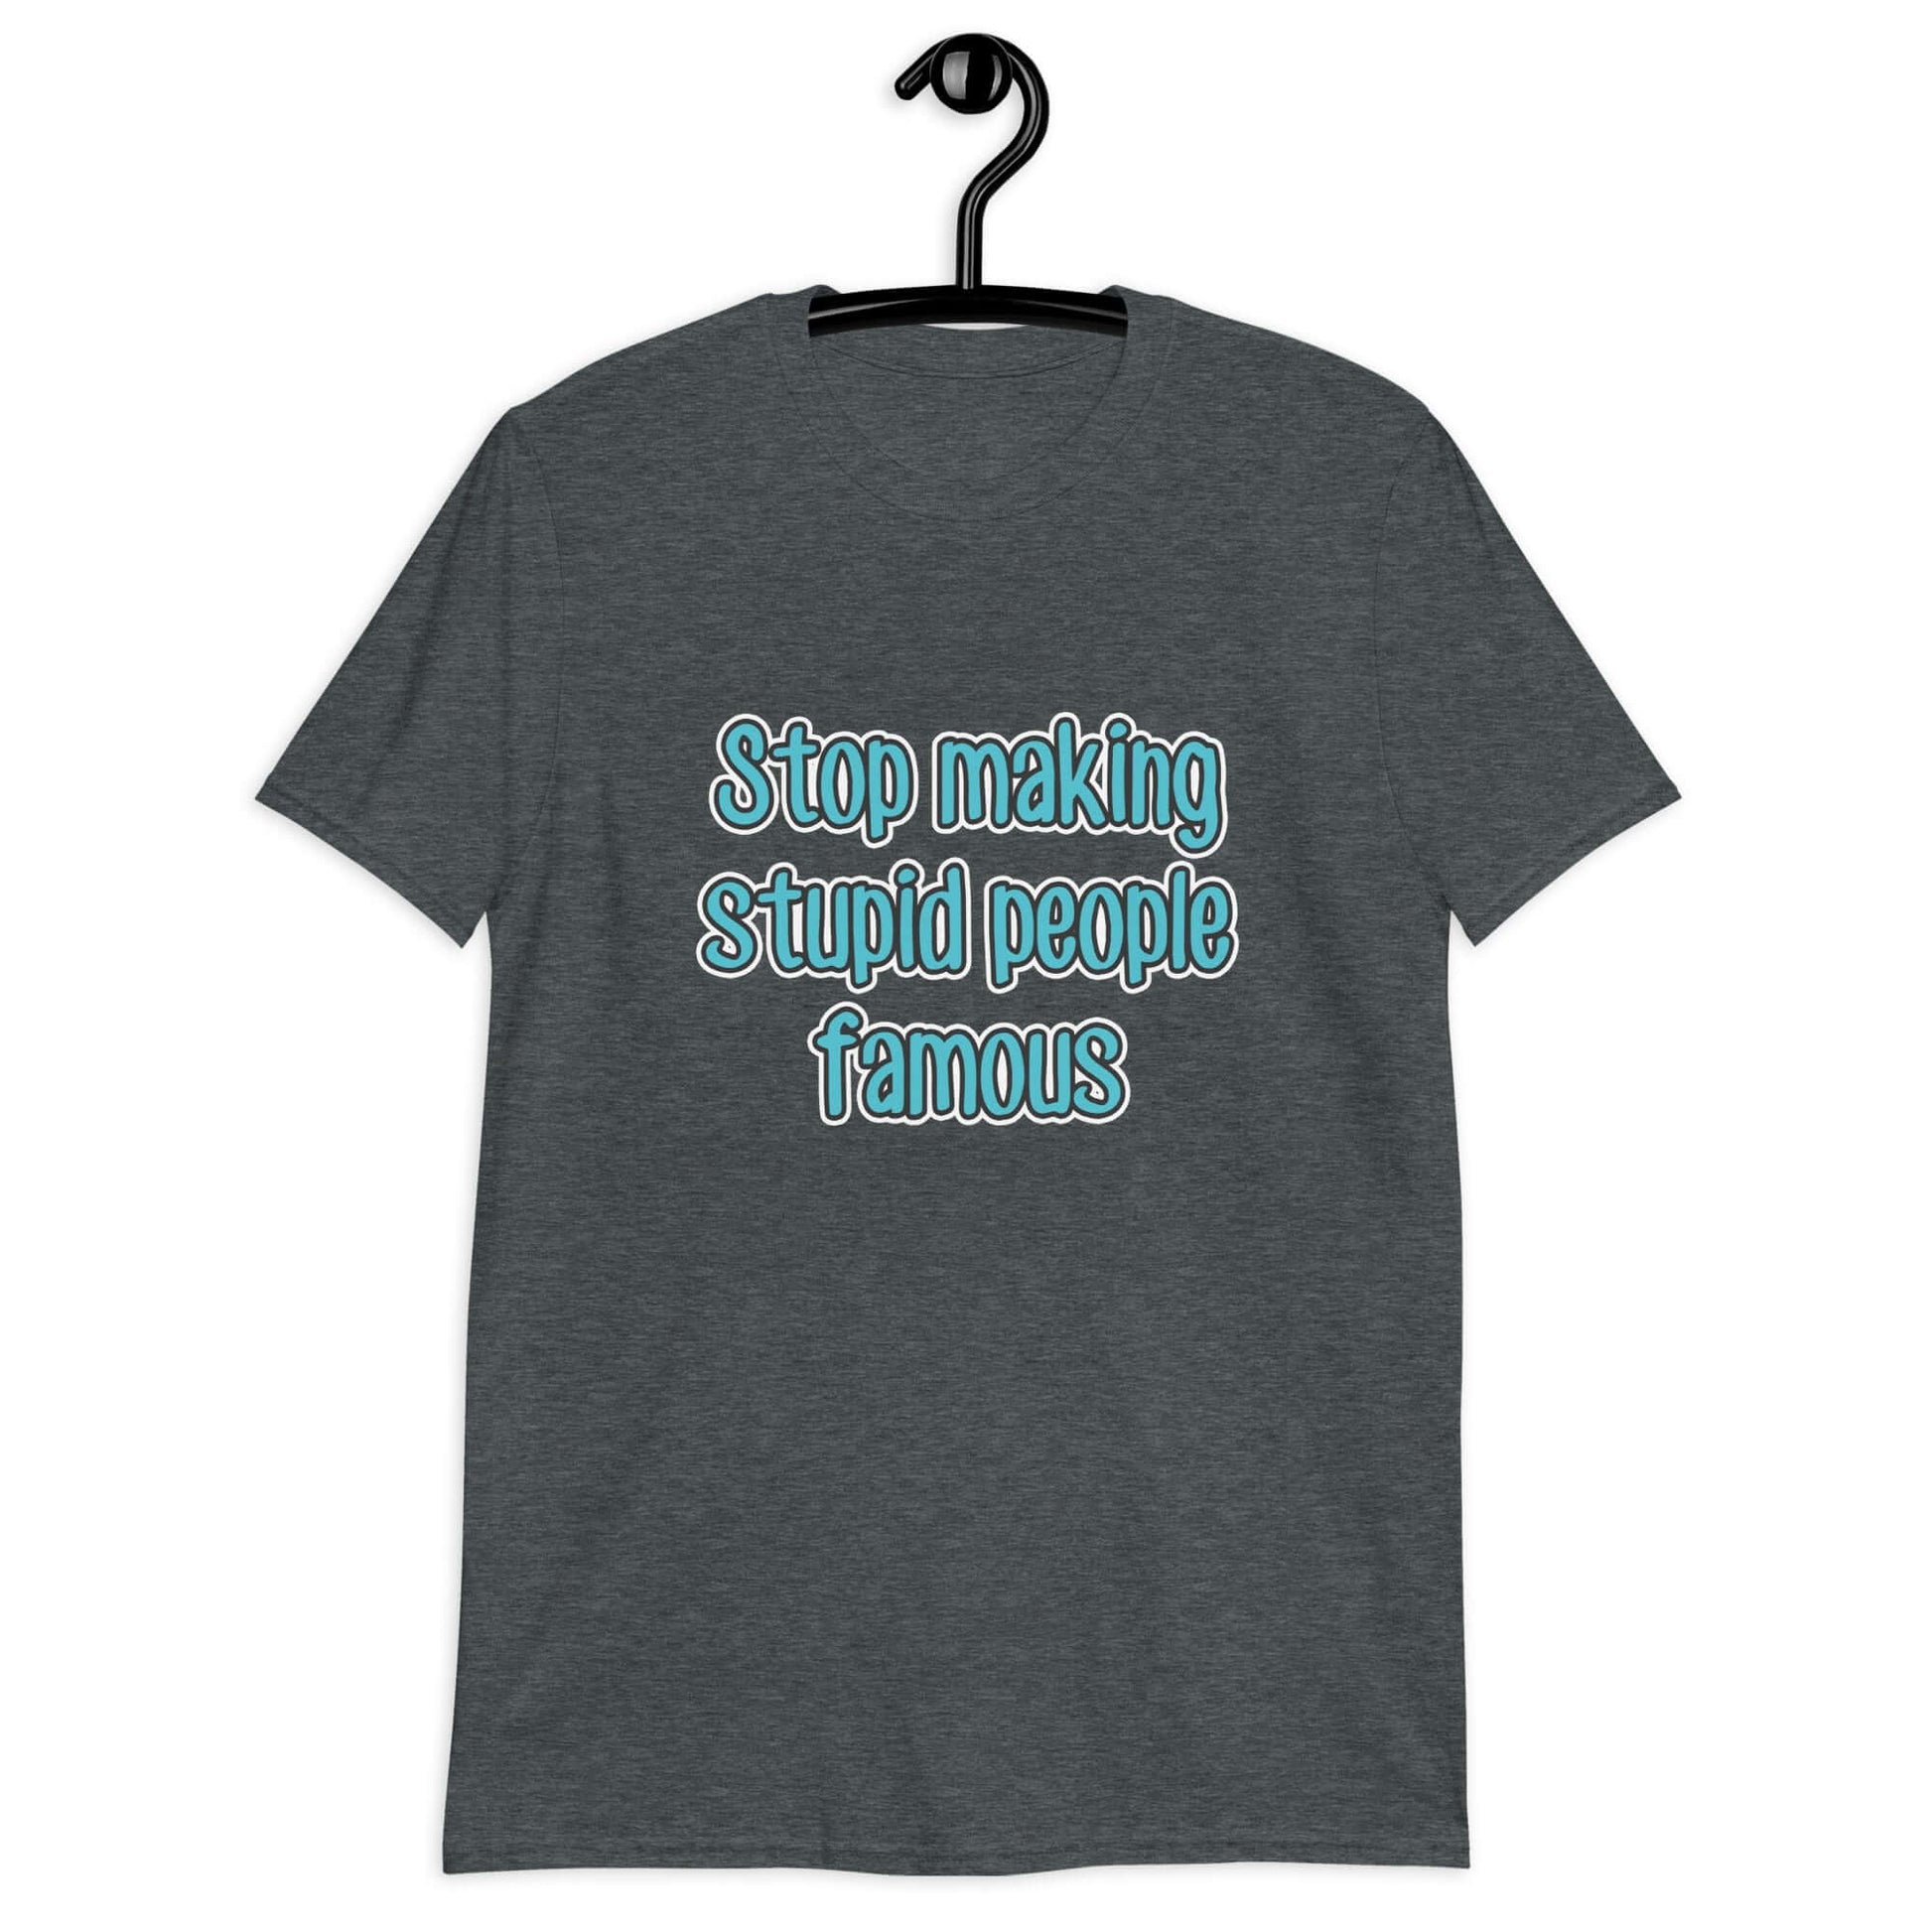 Dark grey t-shirt with the phrase Stop making stupid people famous printed on the front. The text is turquoise. 